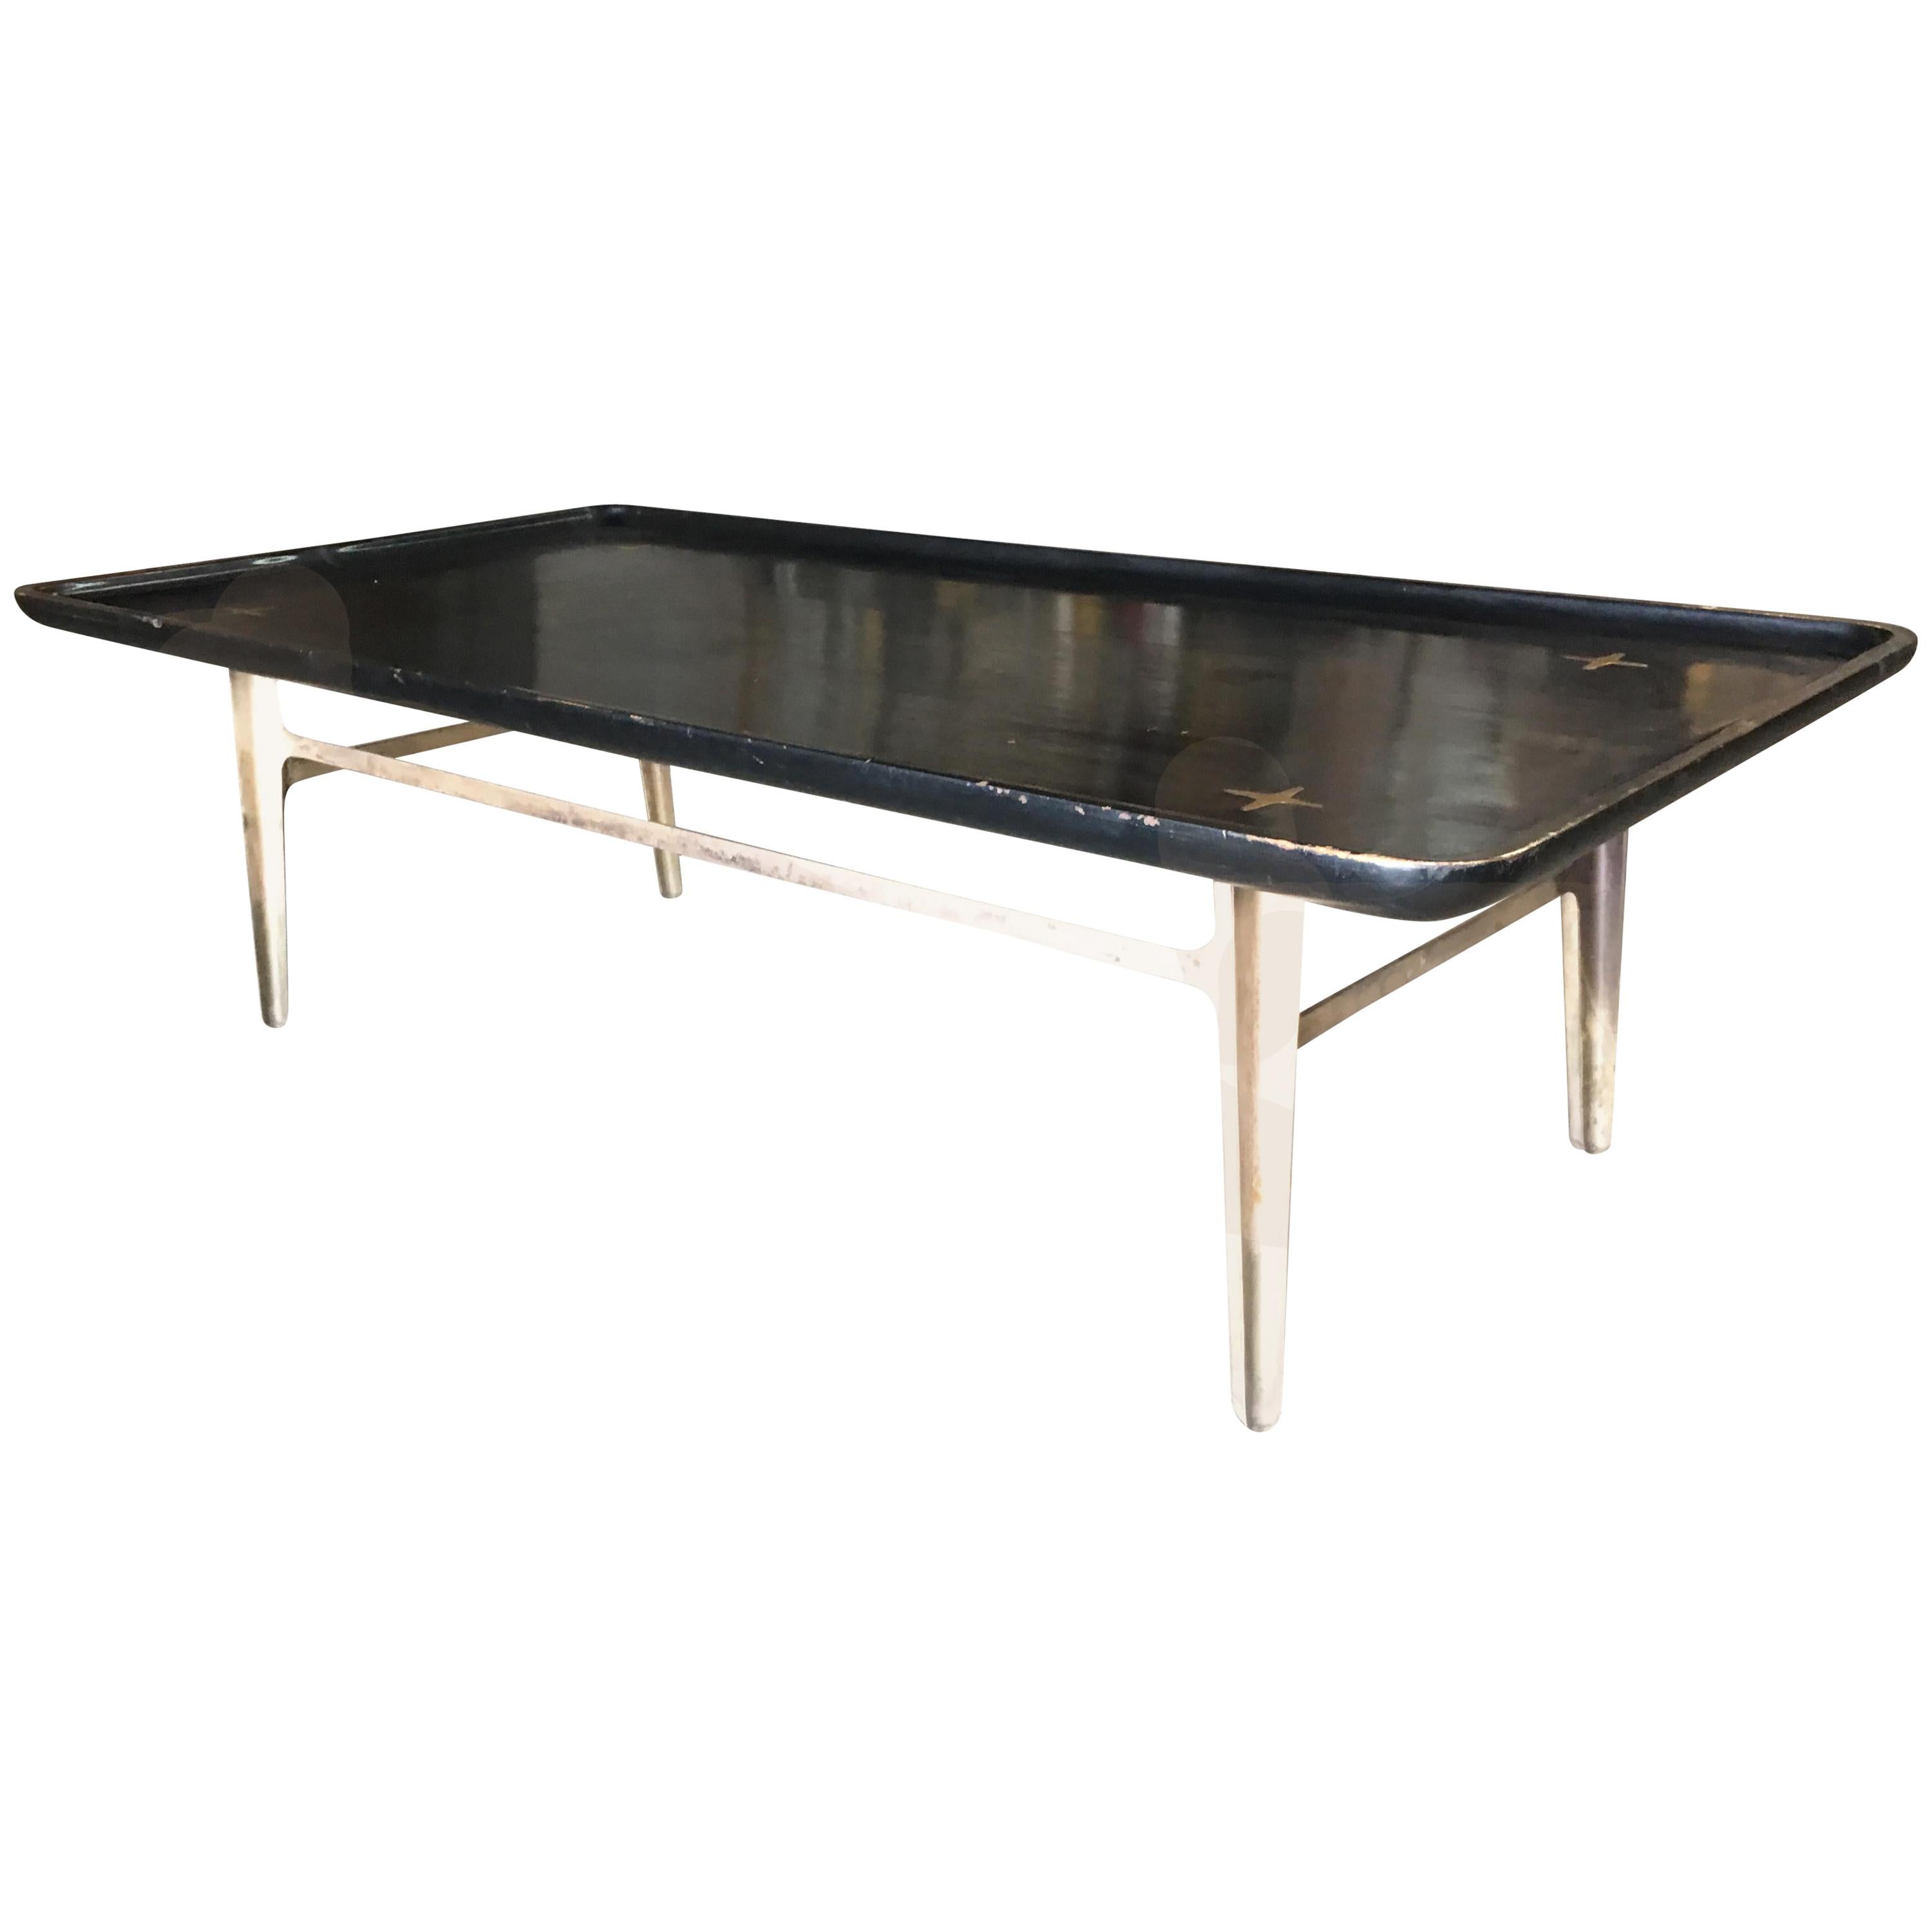 Rare Midcentury Black Lacquer Coffee Table with Solid Cast Bronze Base